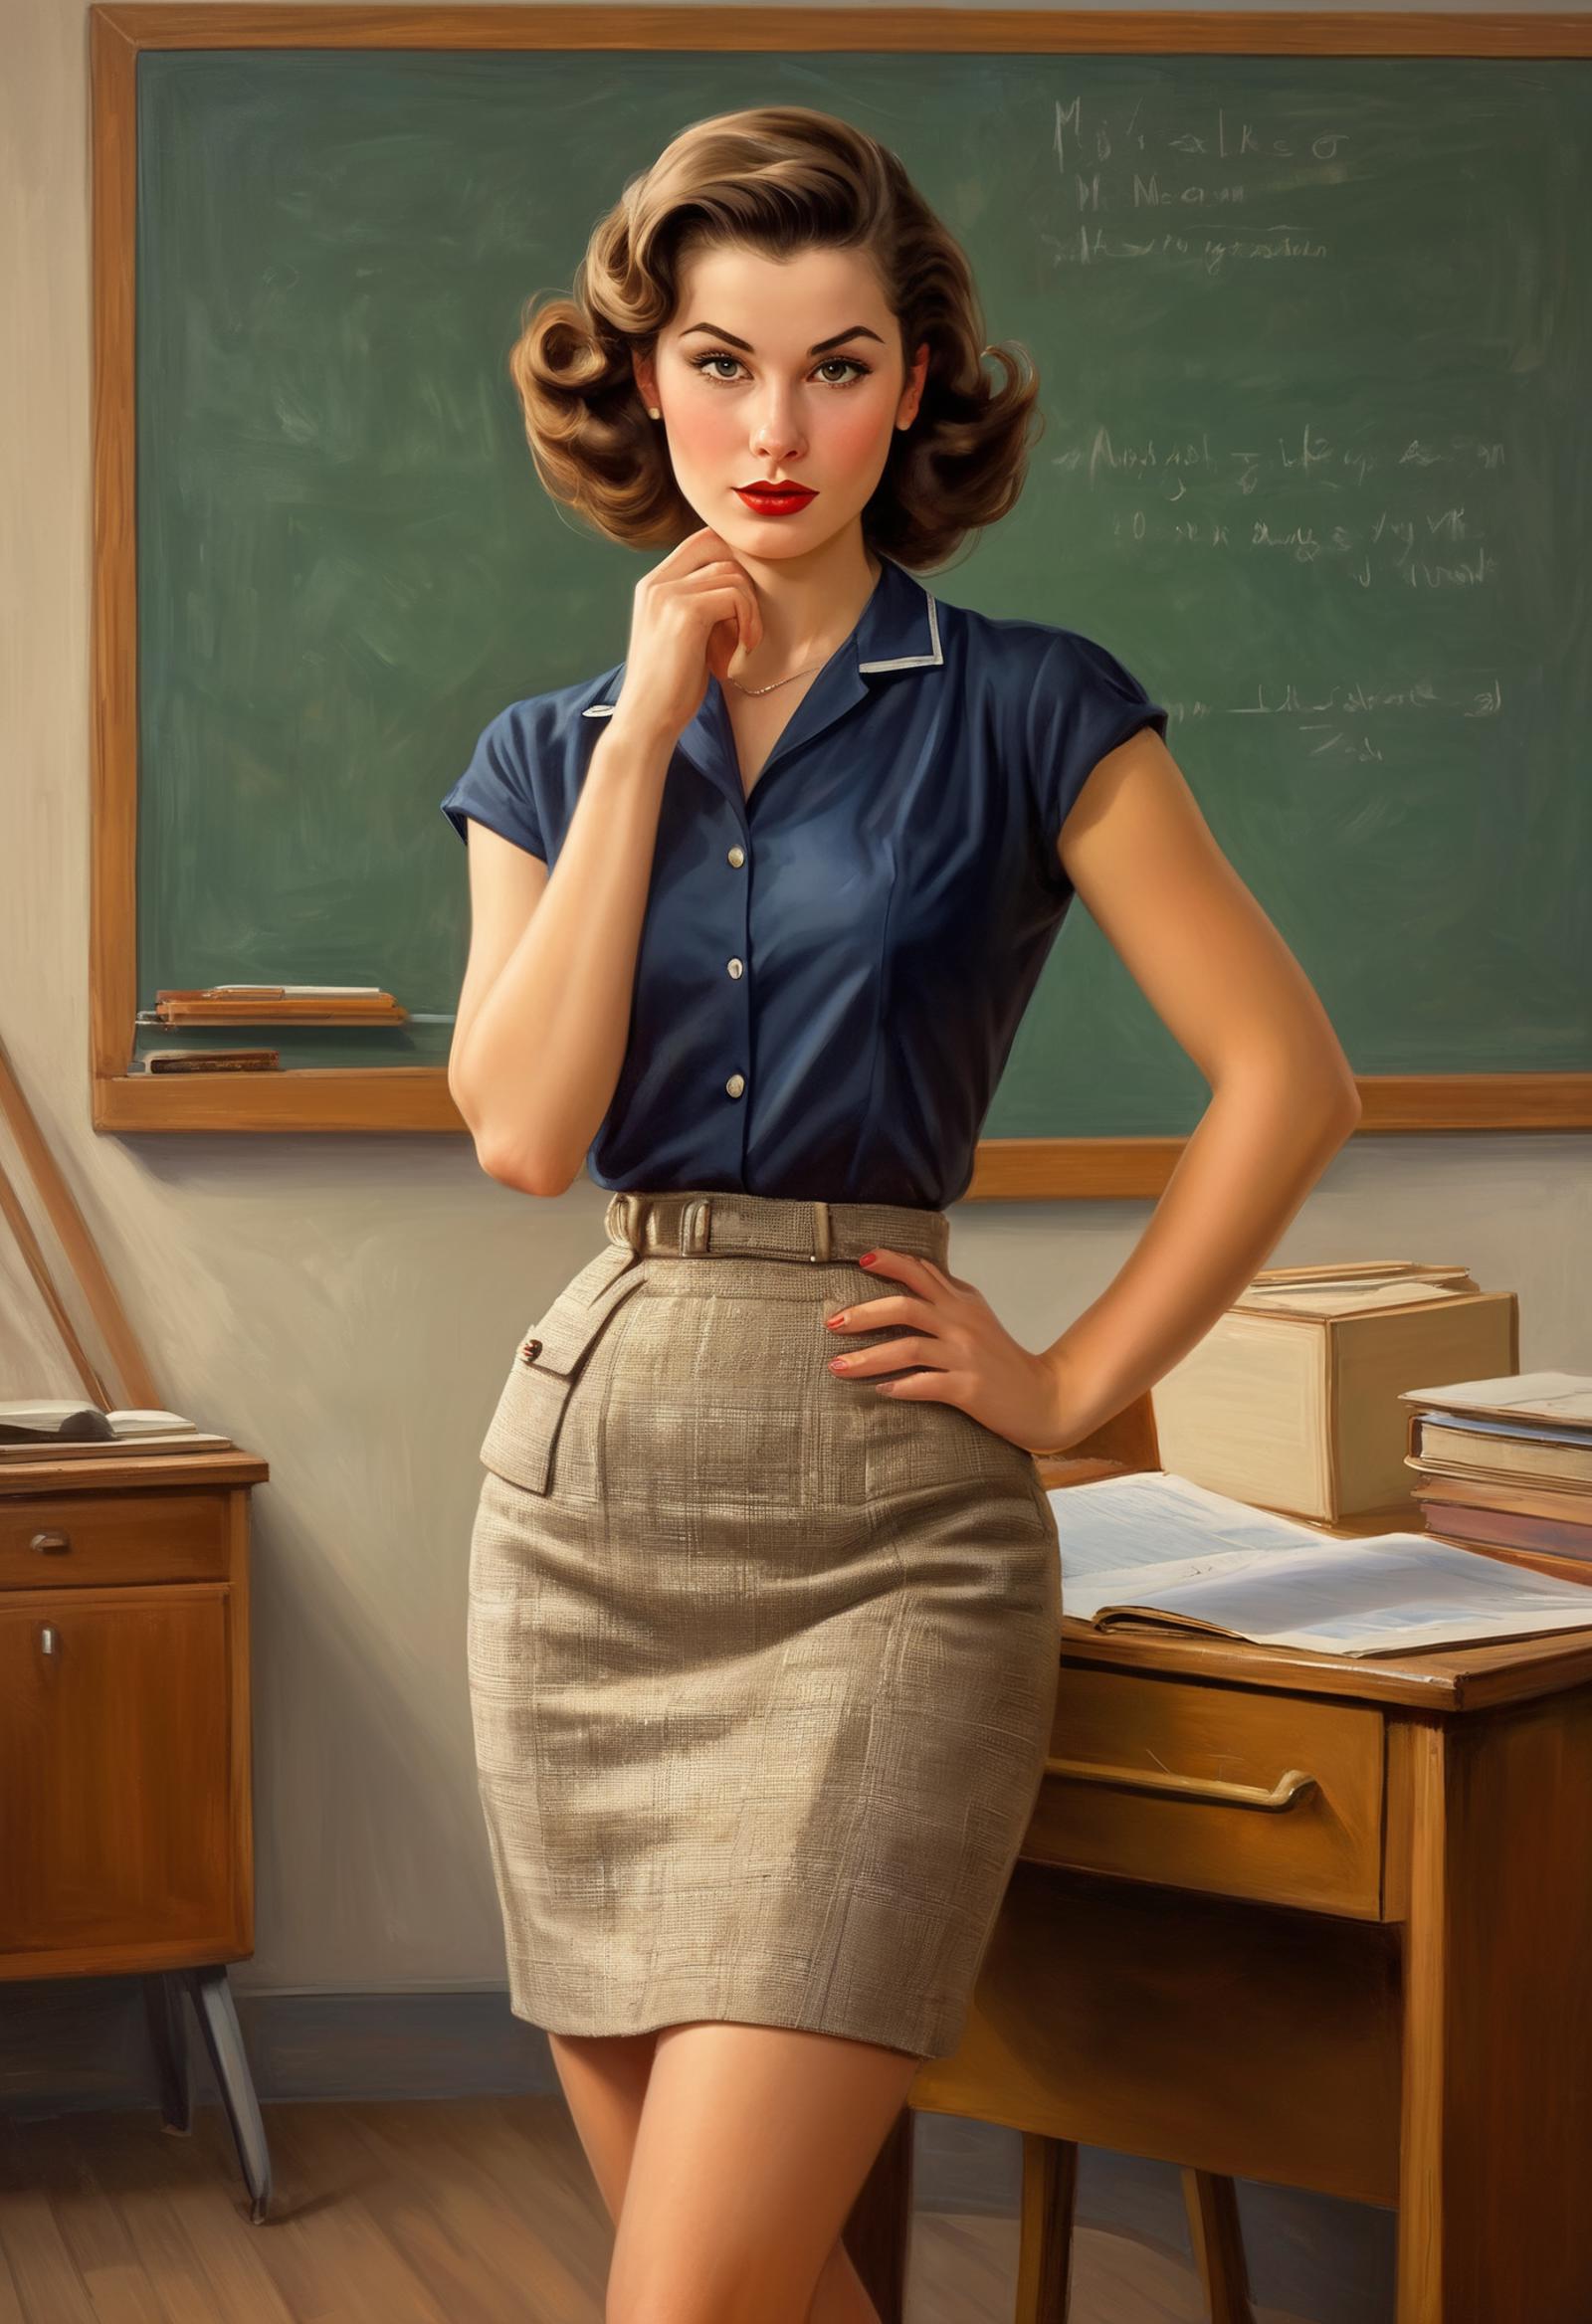 A painting of a woman in a blue shirt and a brown skirt standing in front of a chalkboard.